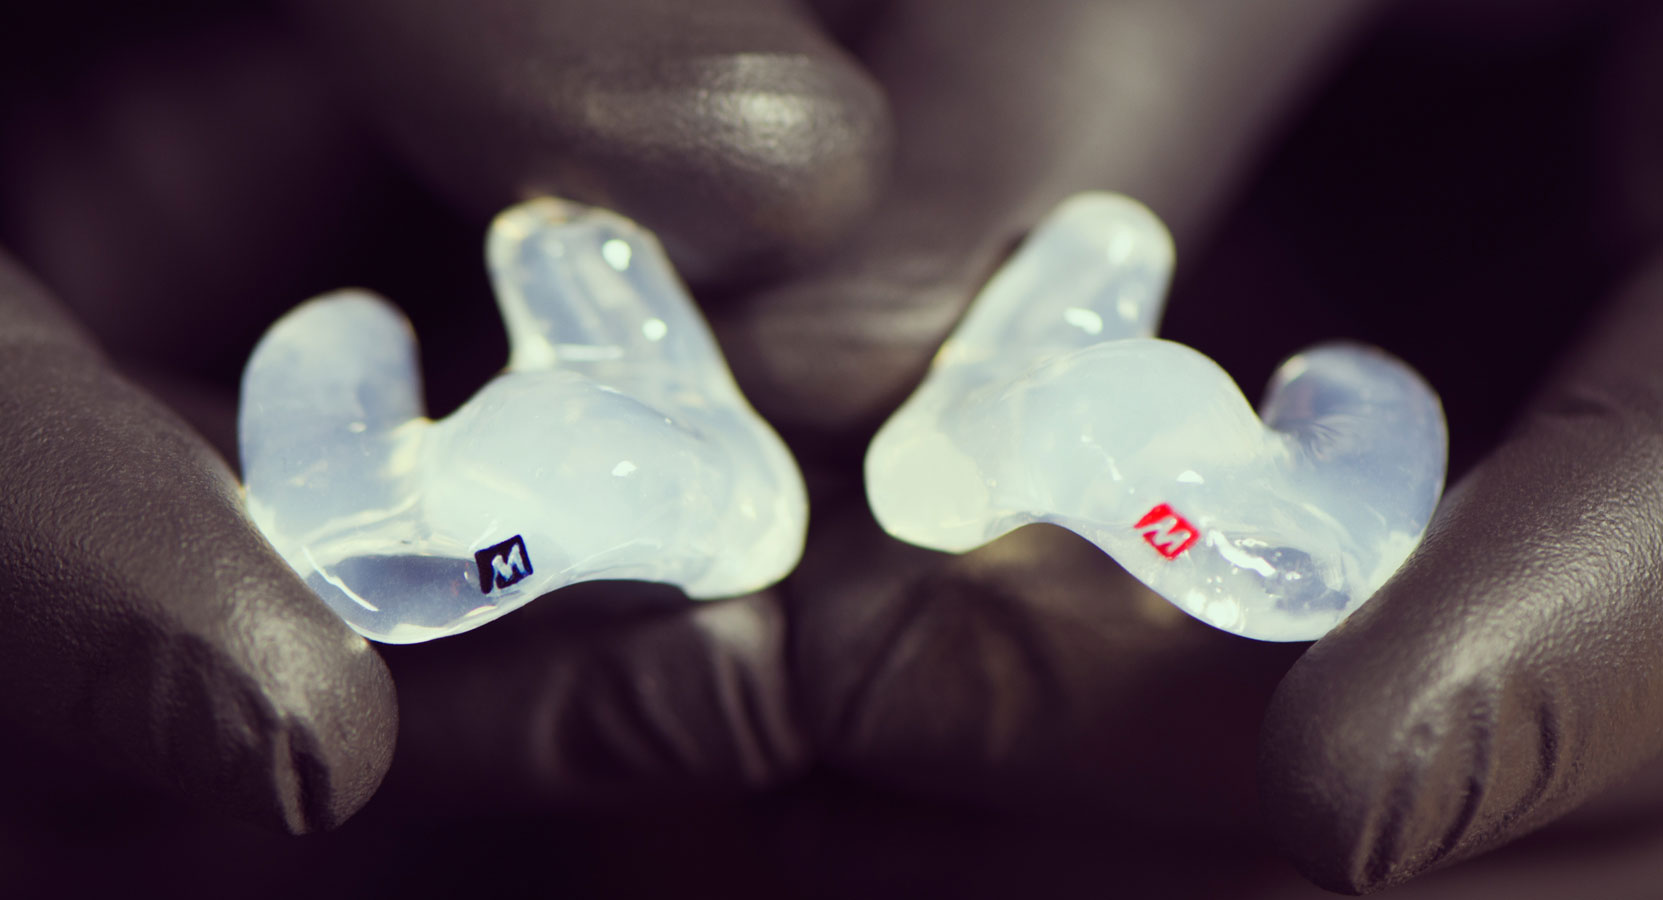 A pair of transparent dental retainers with blue and red identifying marks are held carefully in black gloved hands.